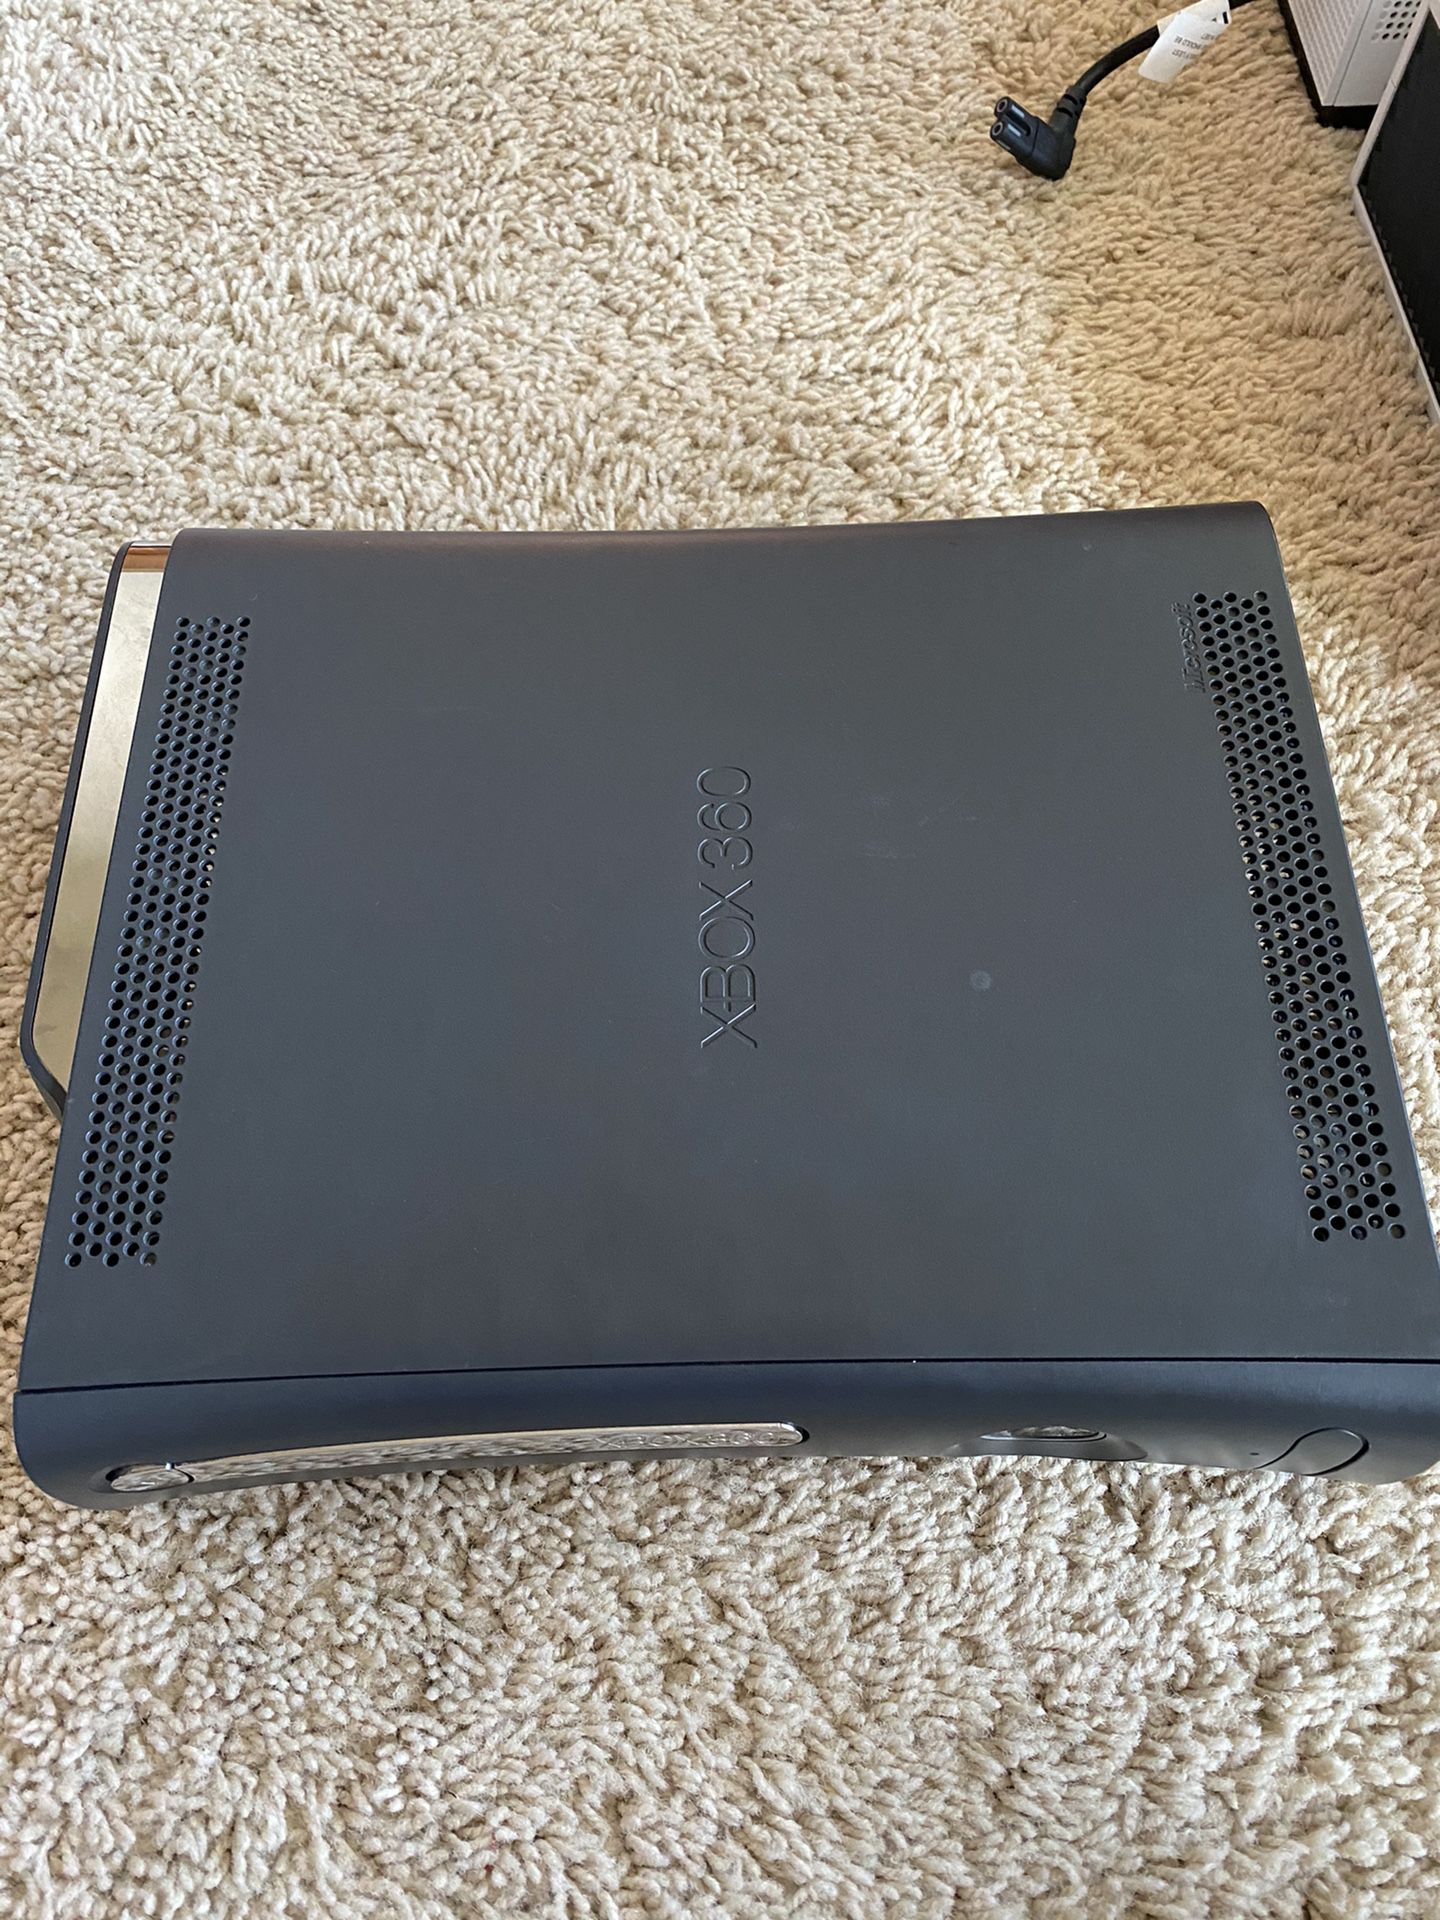 XBOX 360 (CONSOLE ONLY)